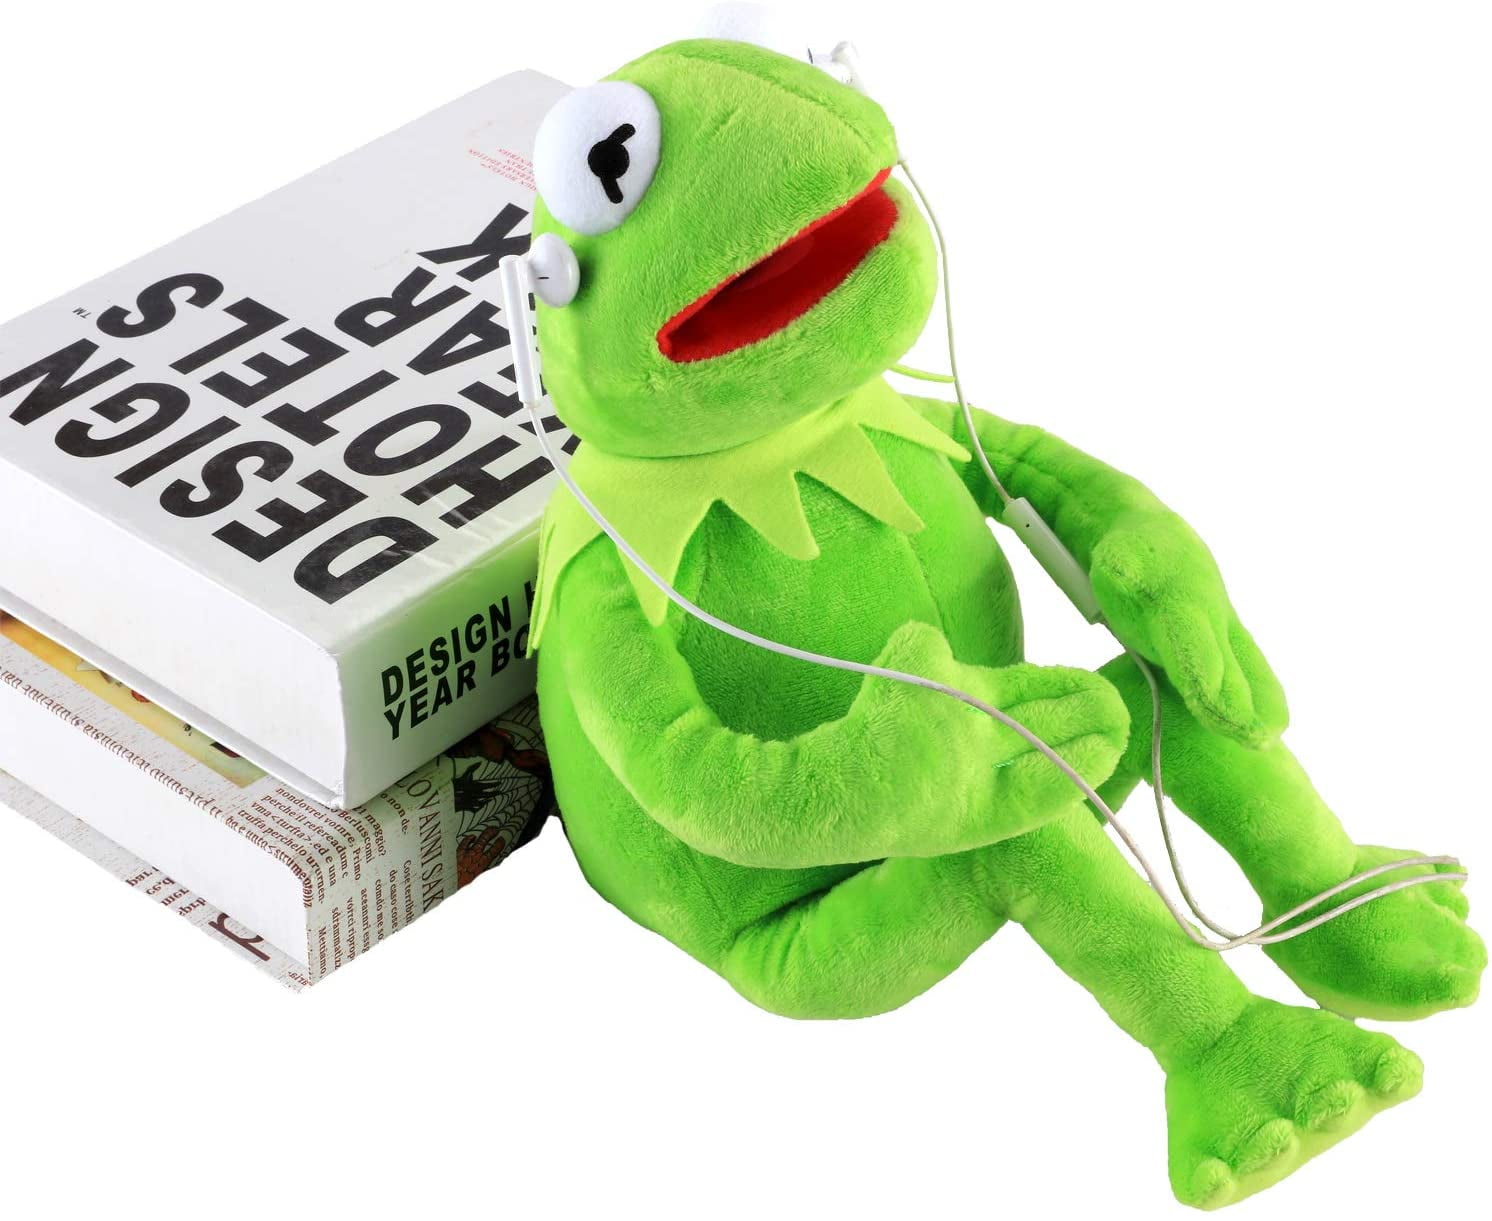 Kermit The Frog Plush Doll, The Muppets Movie Soft Stuffed Plush Toy, 16  inches (Green)